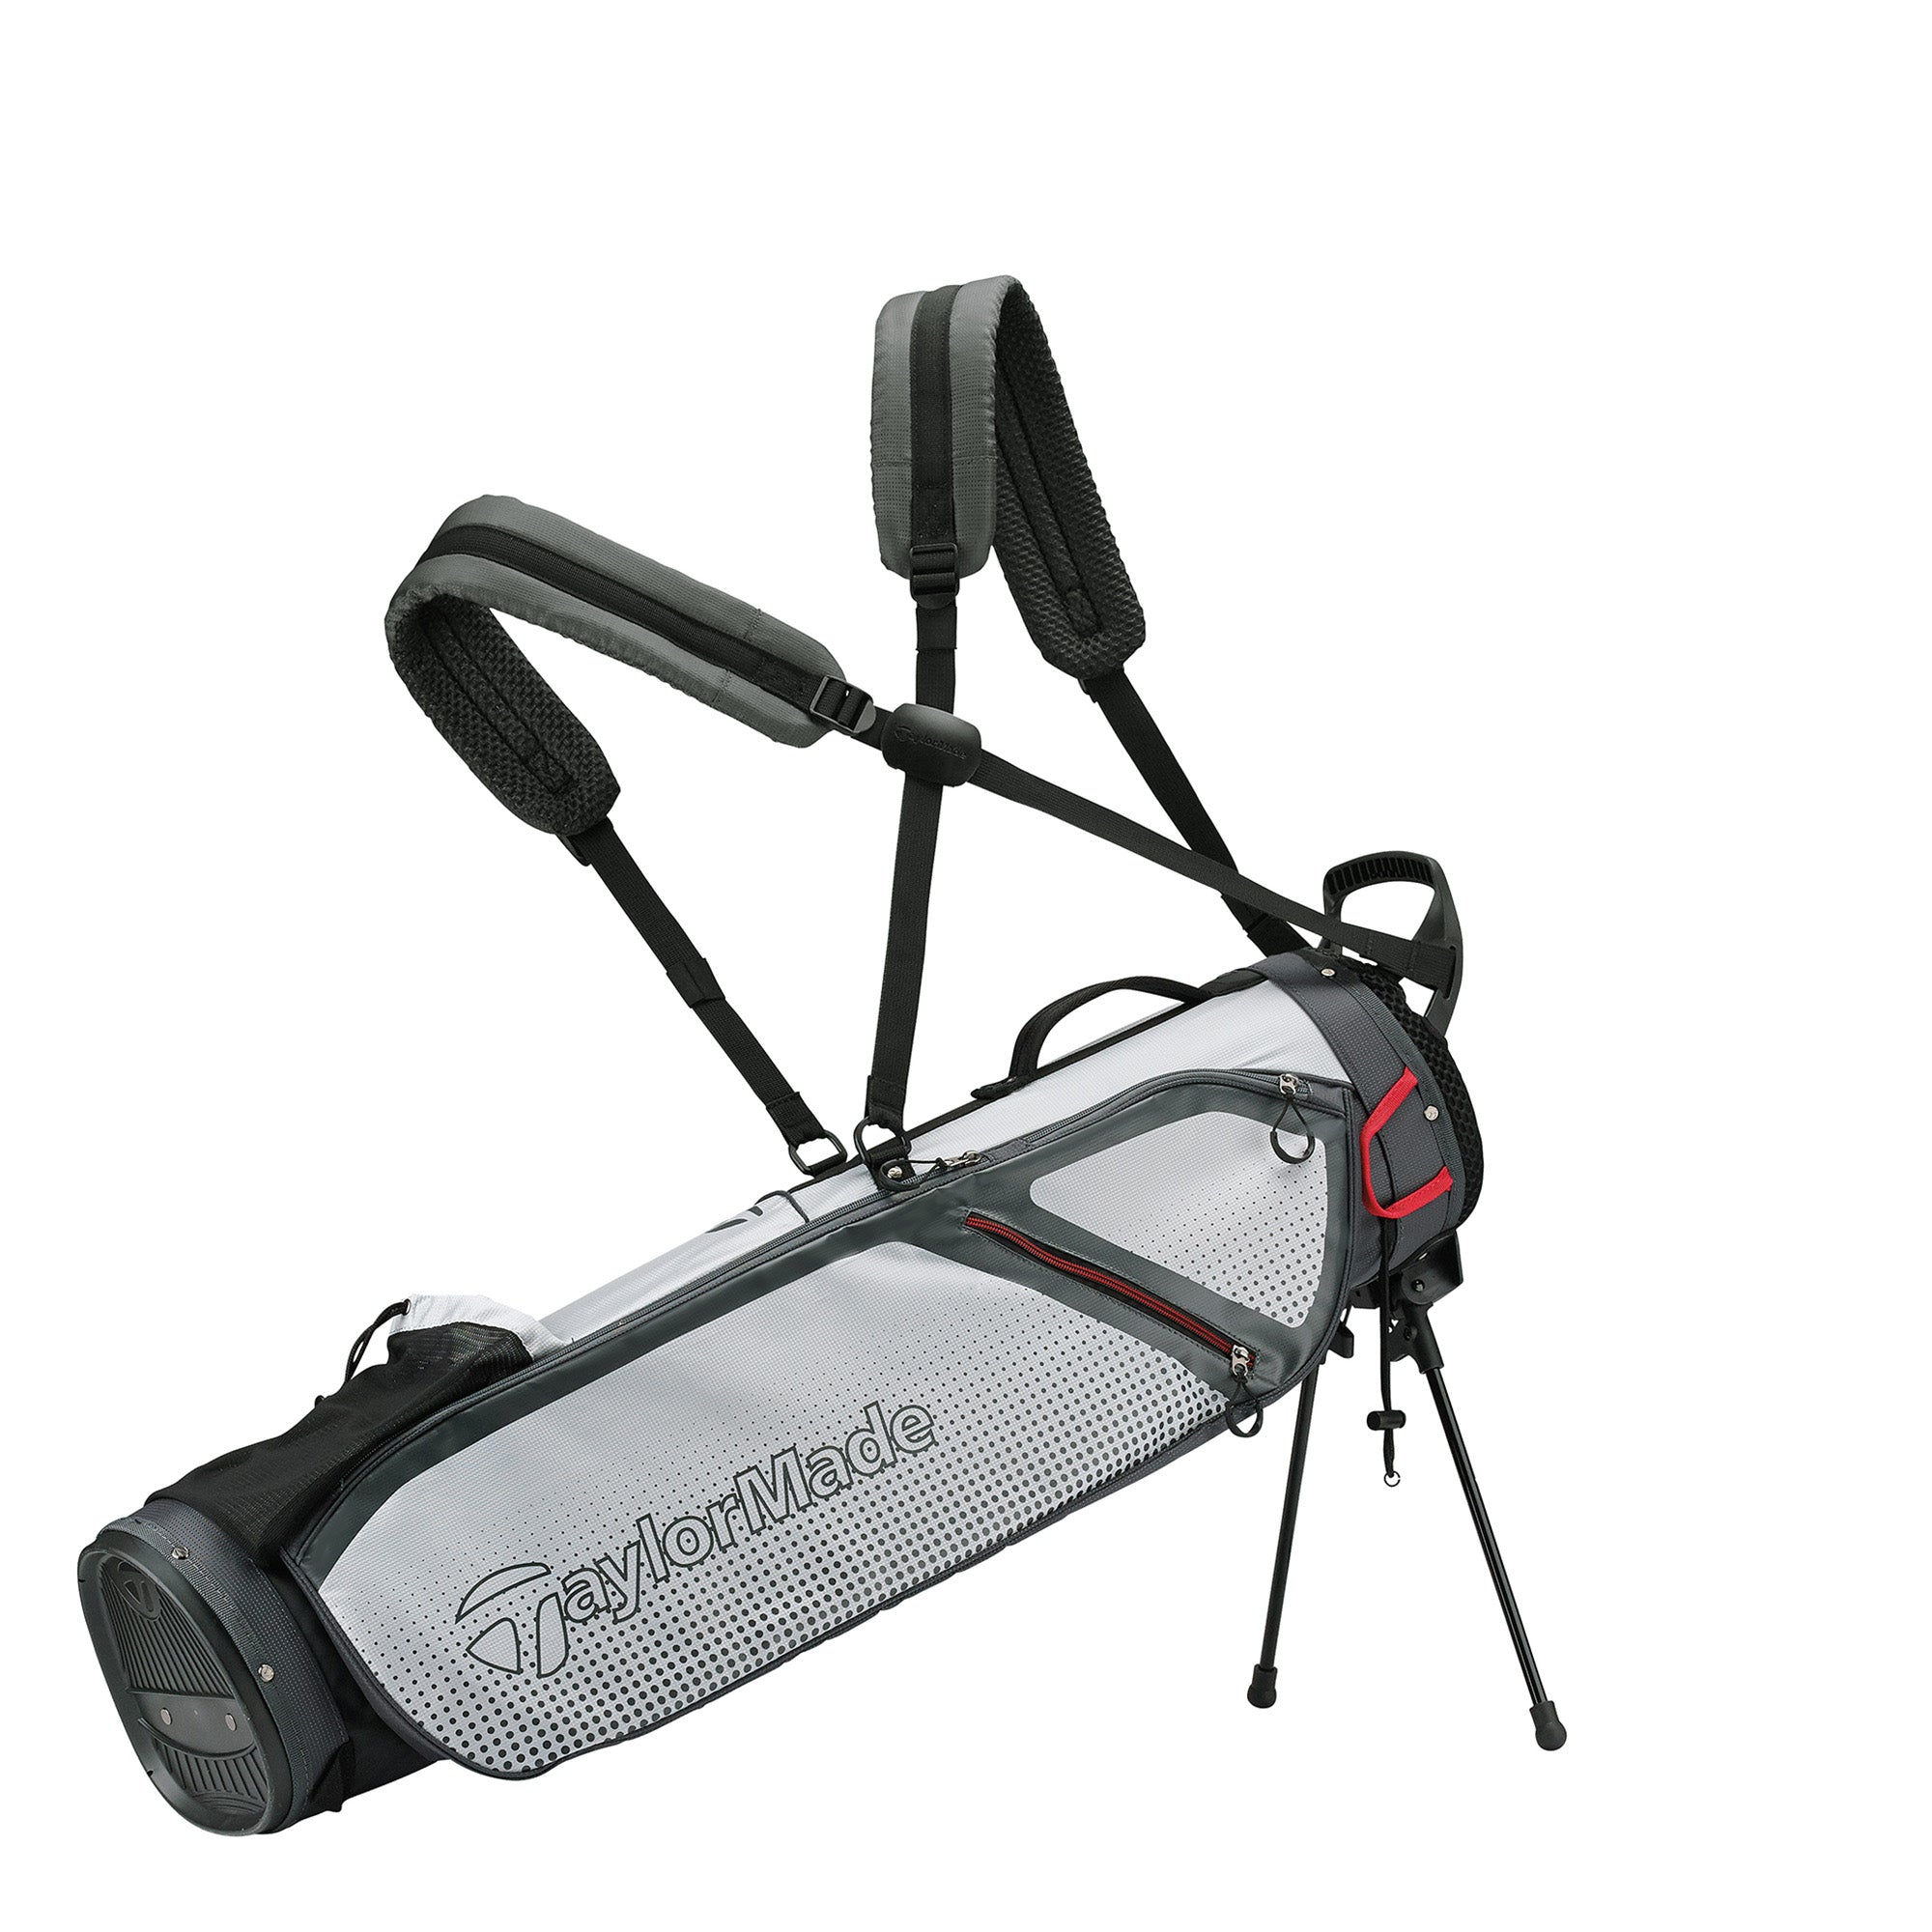 taylormade-quiver-carry-bag-n77707-grey-white